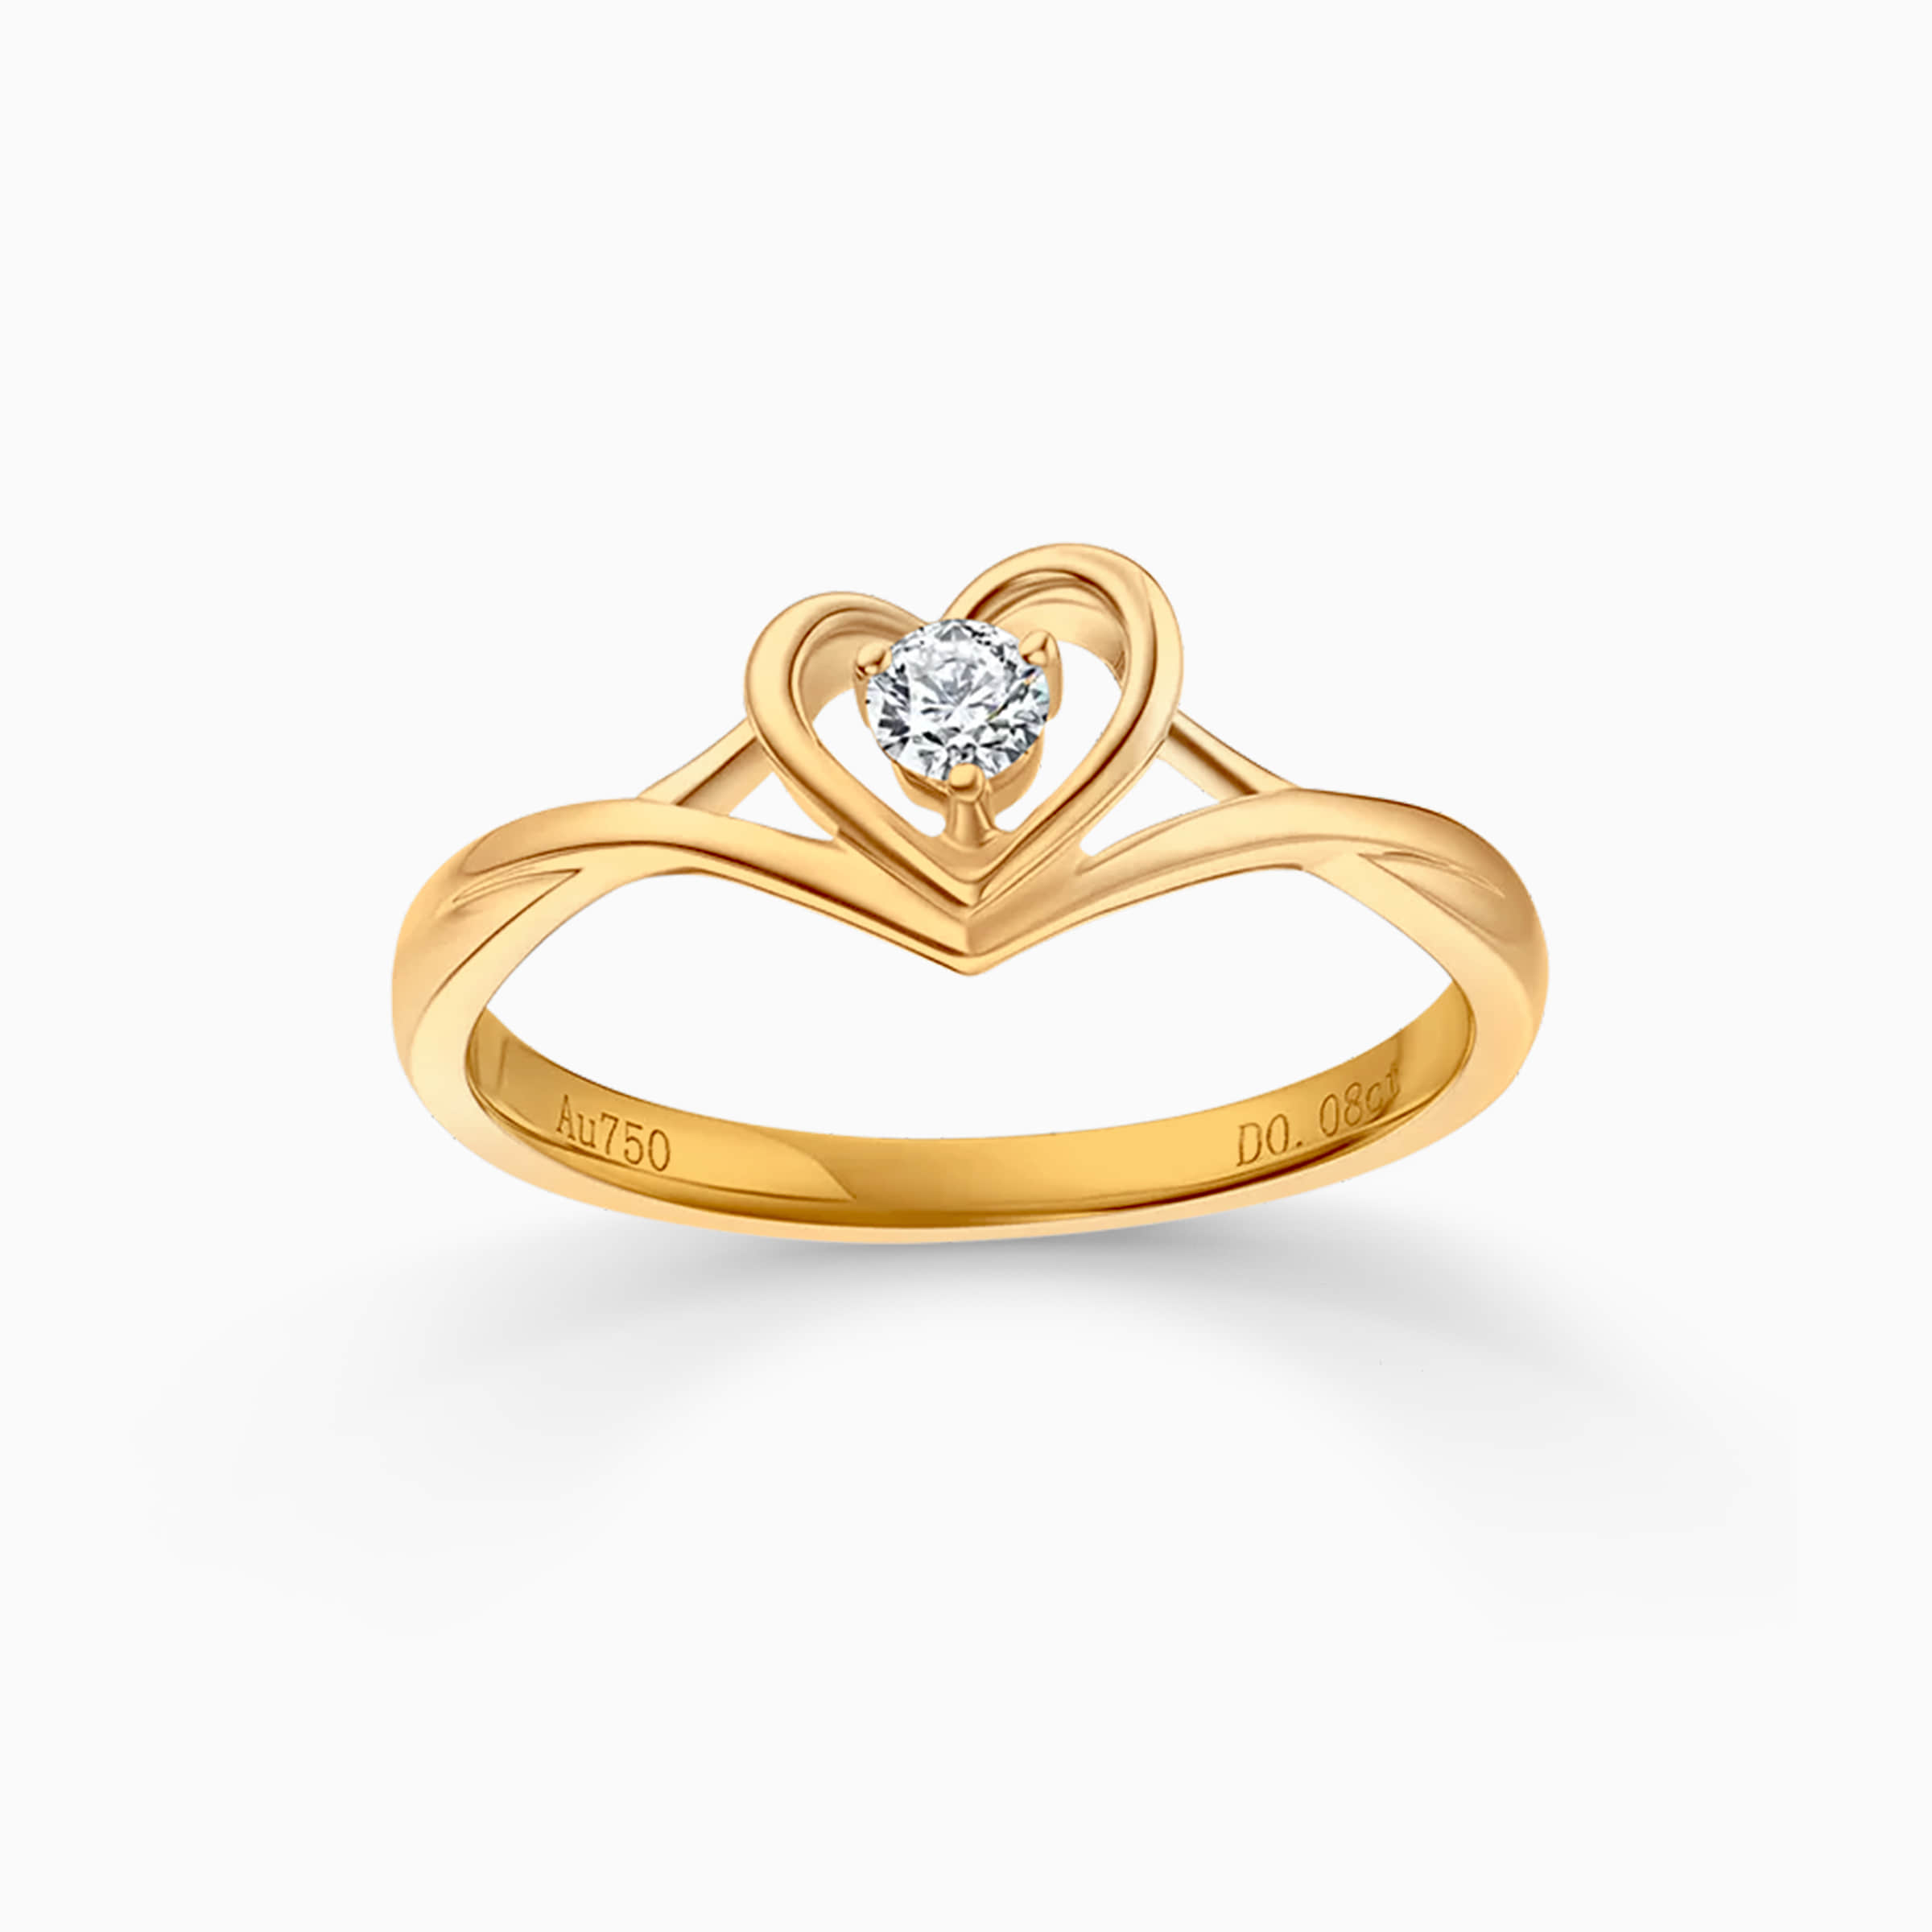 Darry Ring simple promise ring yellow gold